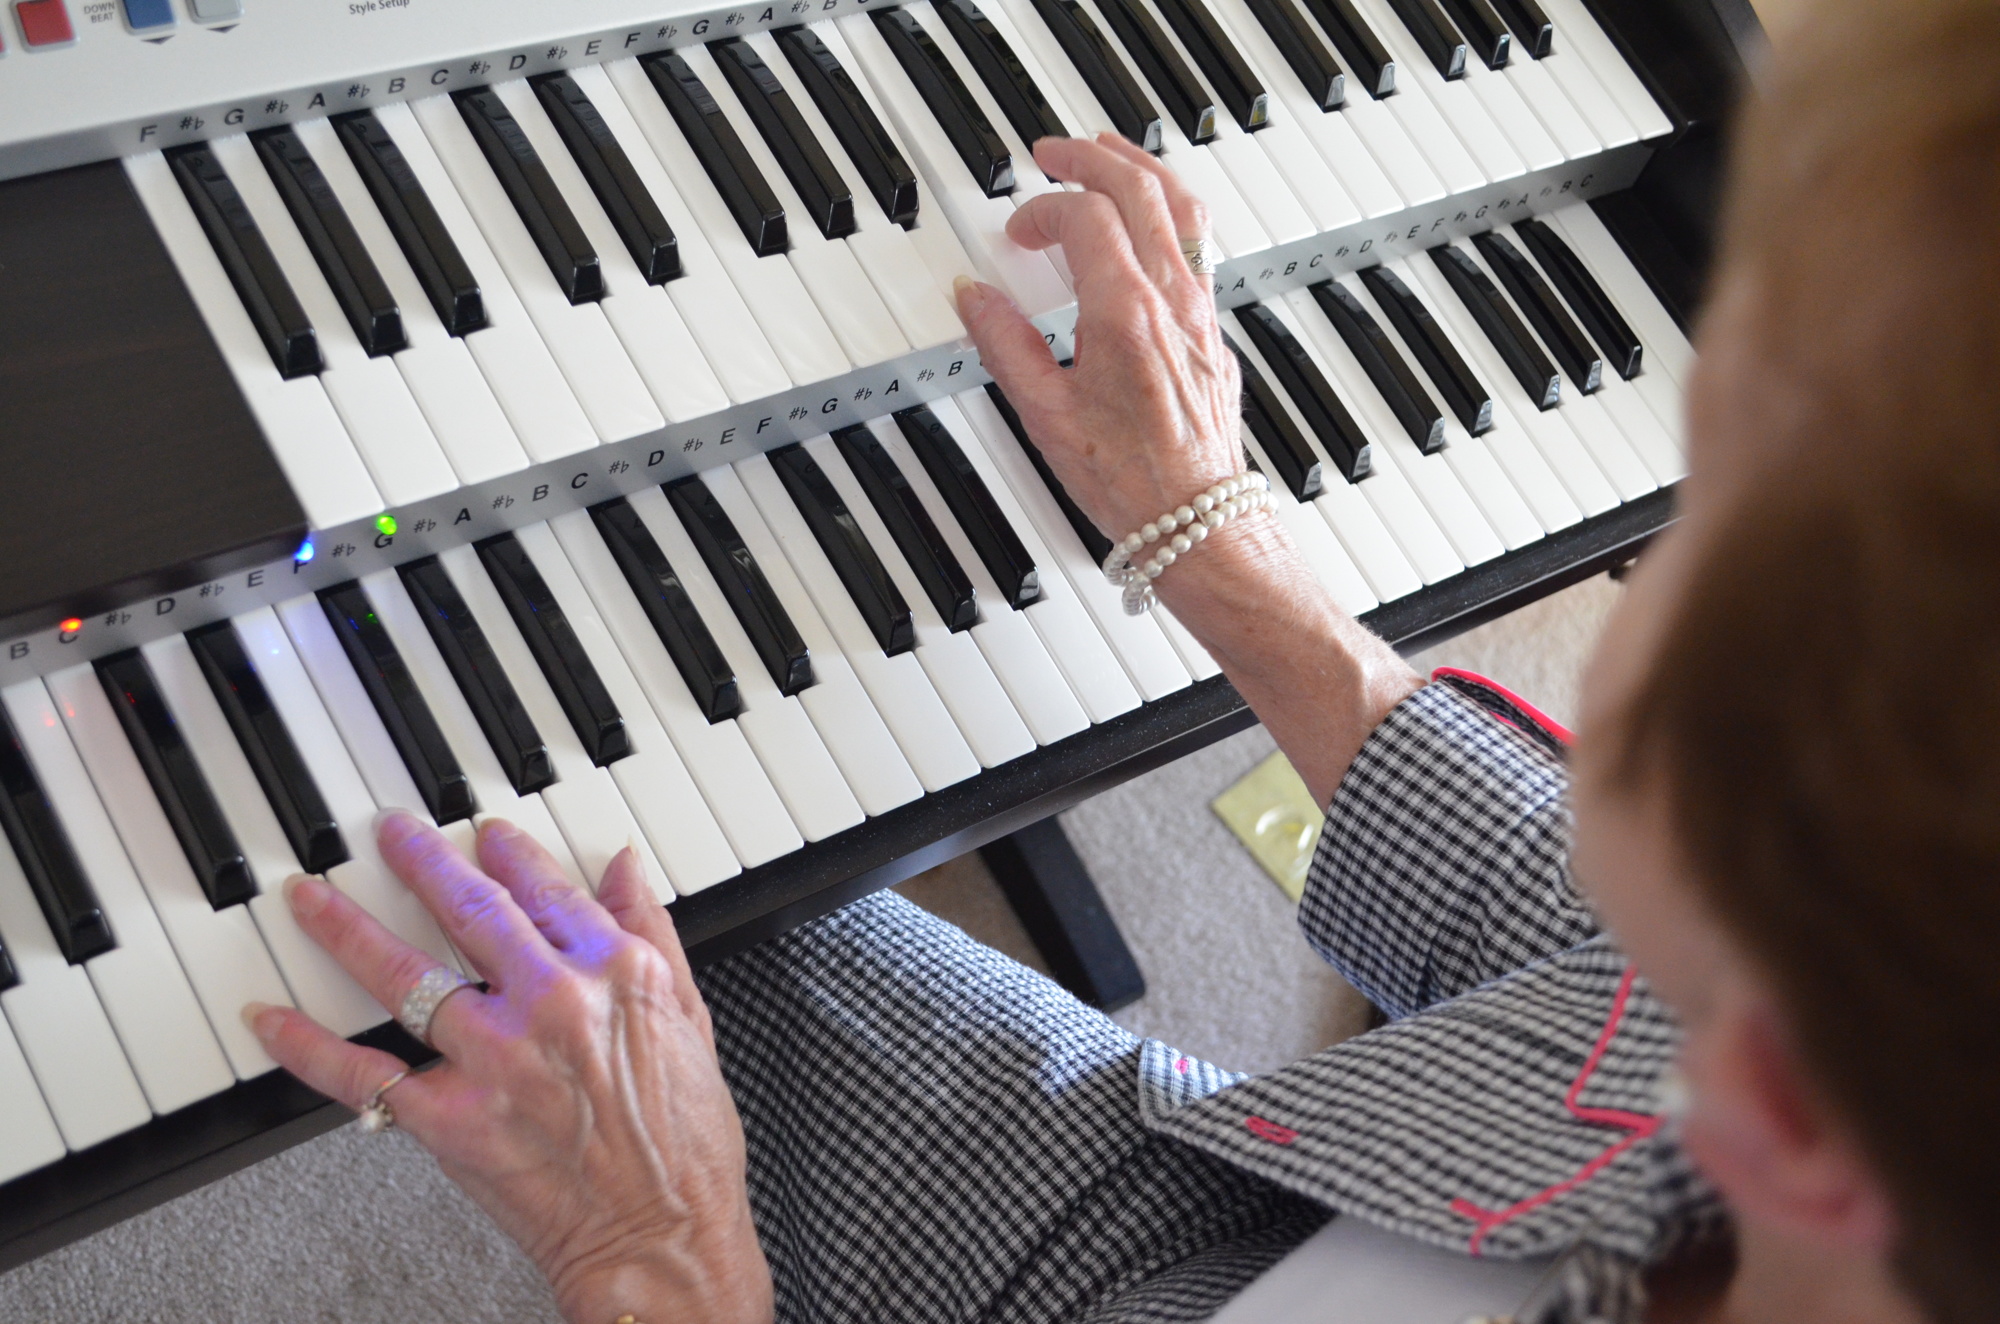 The keyboard Loretta Schwaner plays differs from a piano because it has two keyboards and electronic arrangements to accompany the player.